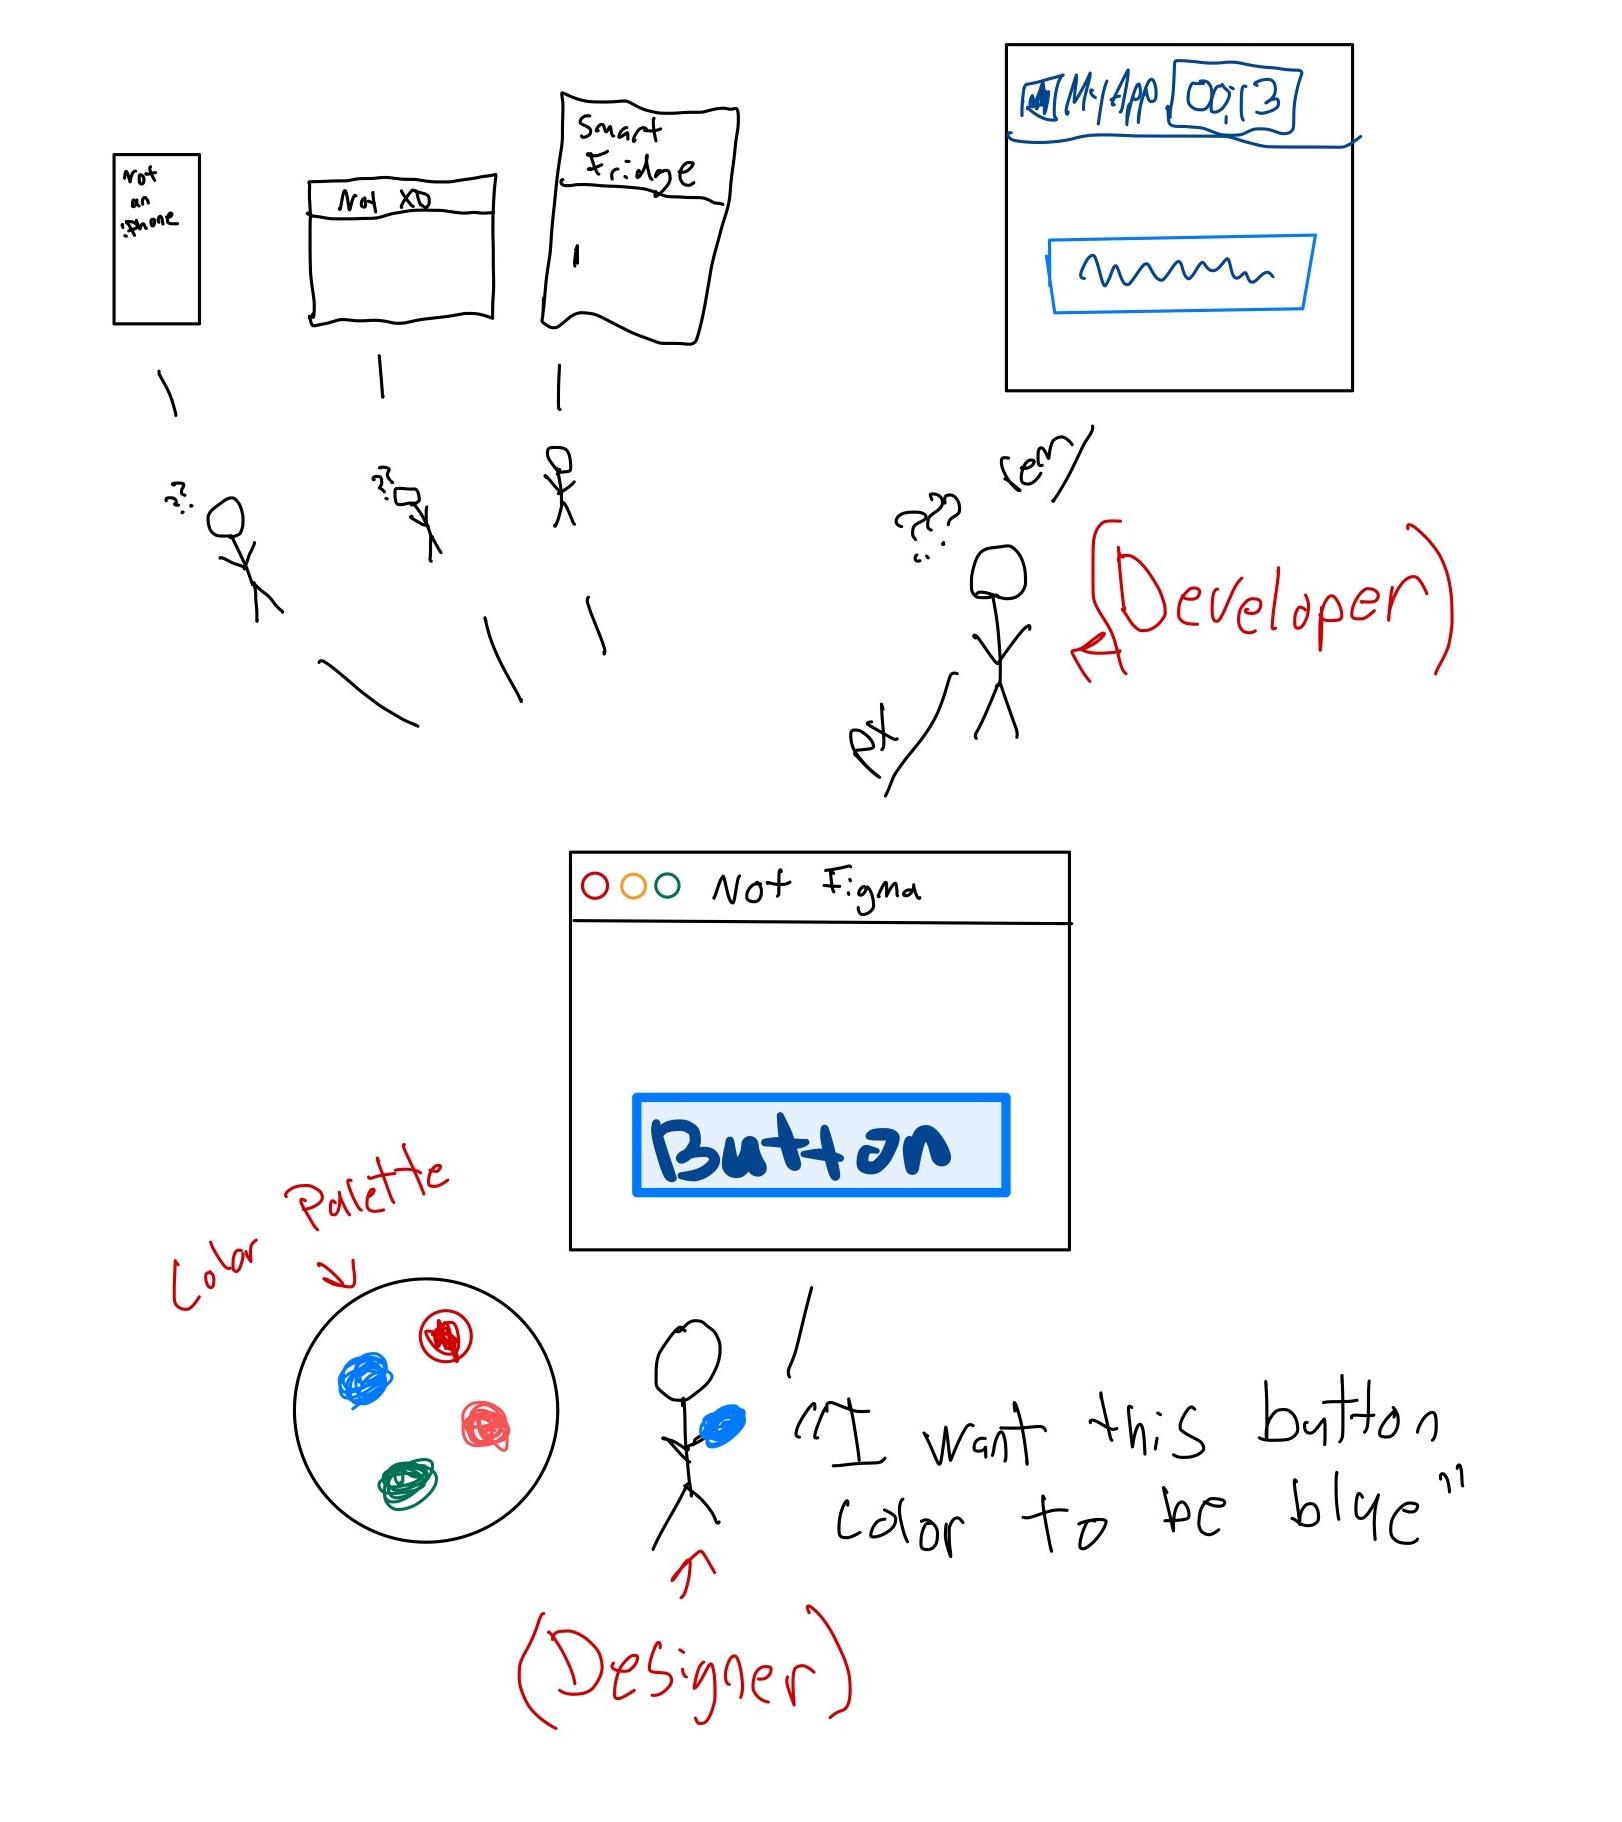 a design system worfklow where one designer decides on a color of a button and a developer decodes it from a design file